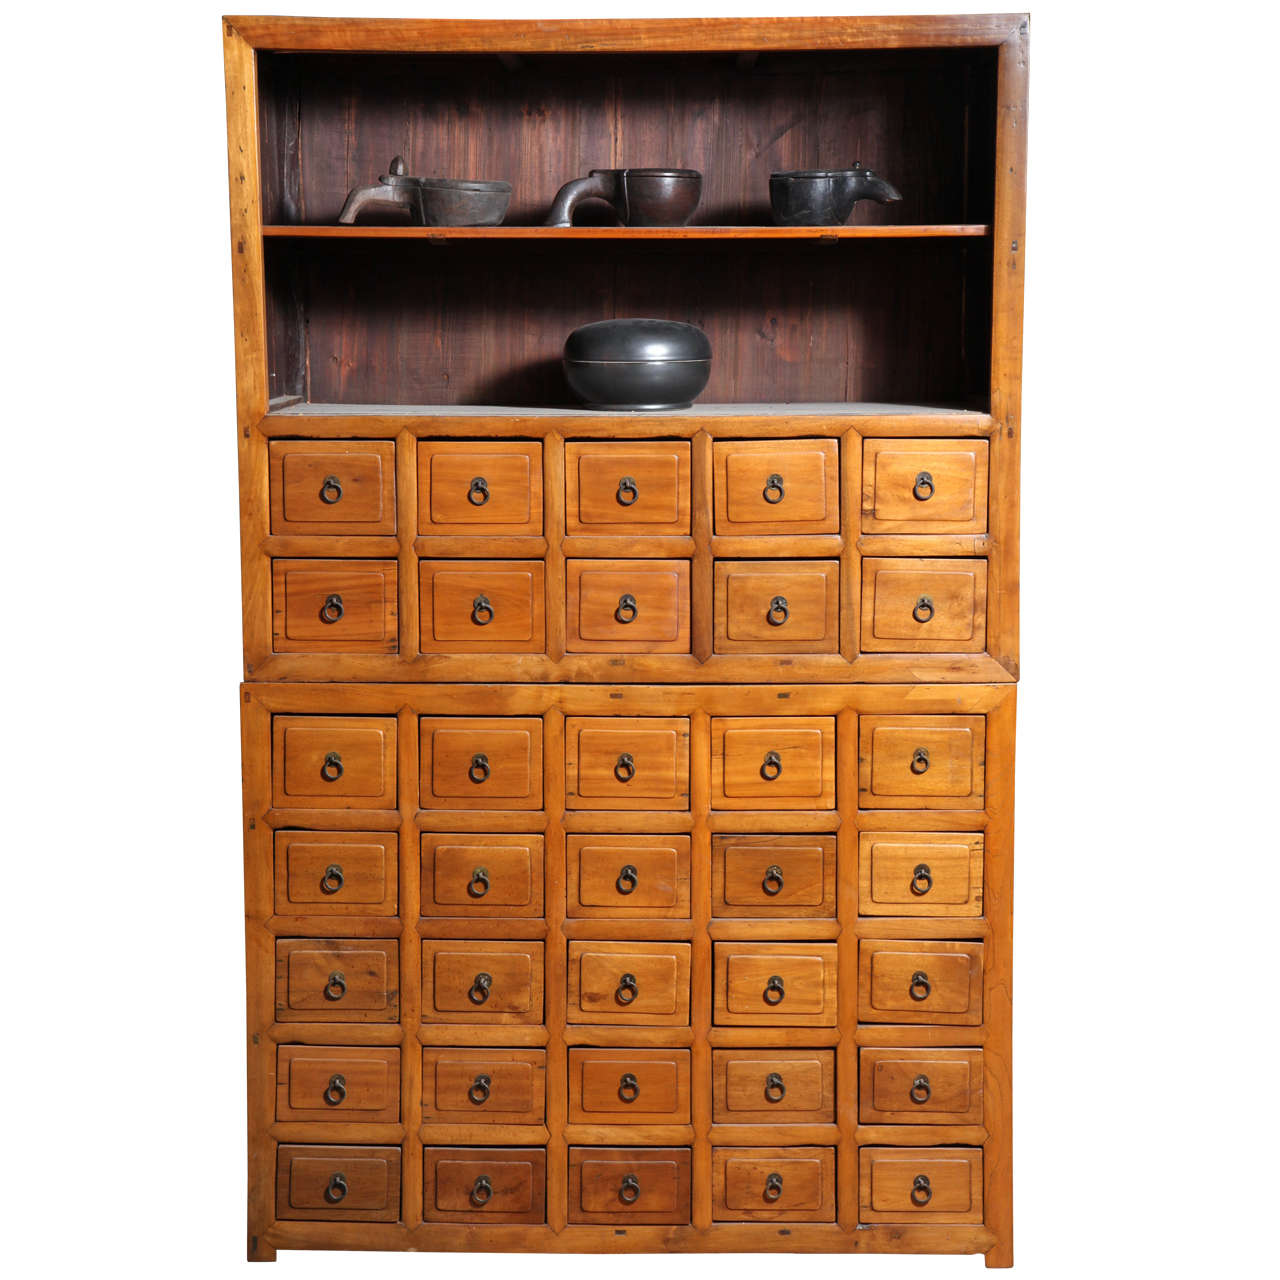 19th Century Chinese Apothecary Medicine Cabinet With 45 Drawers